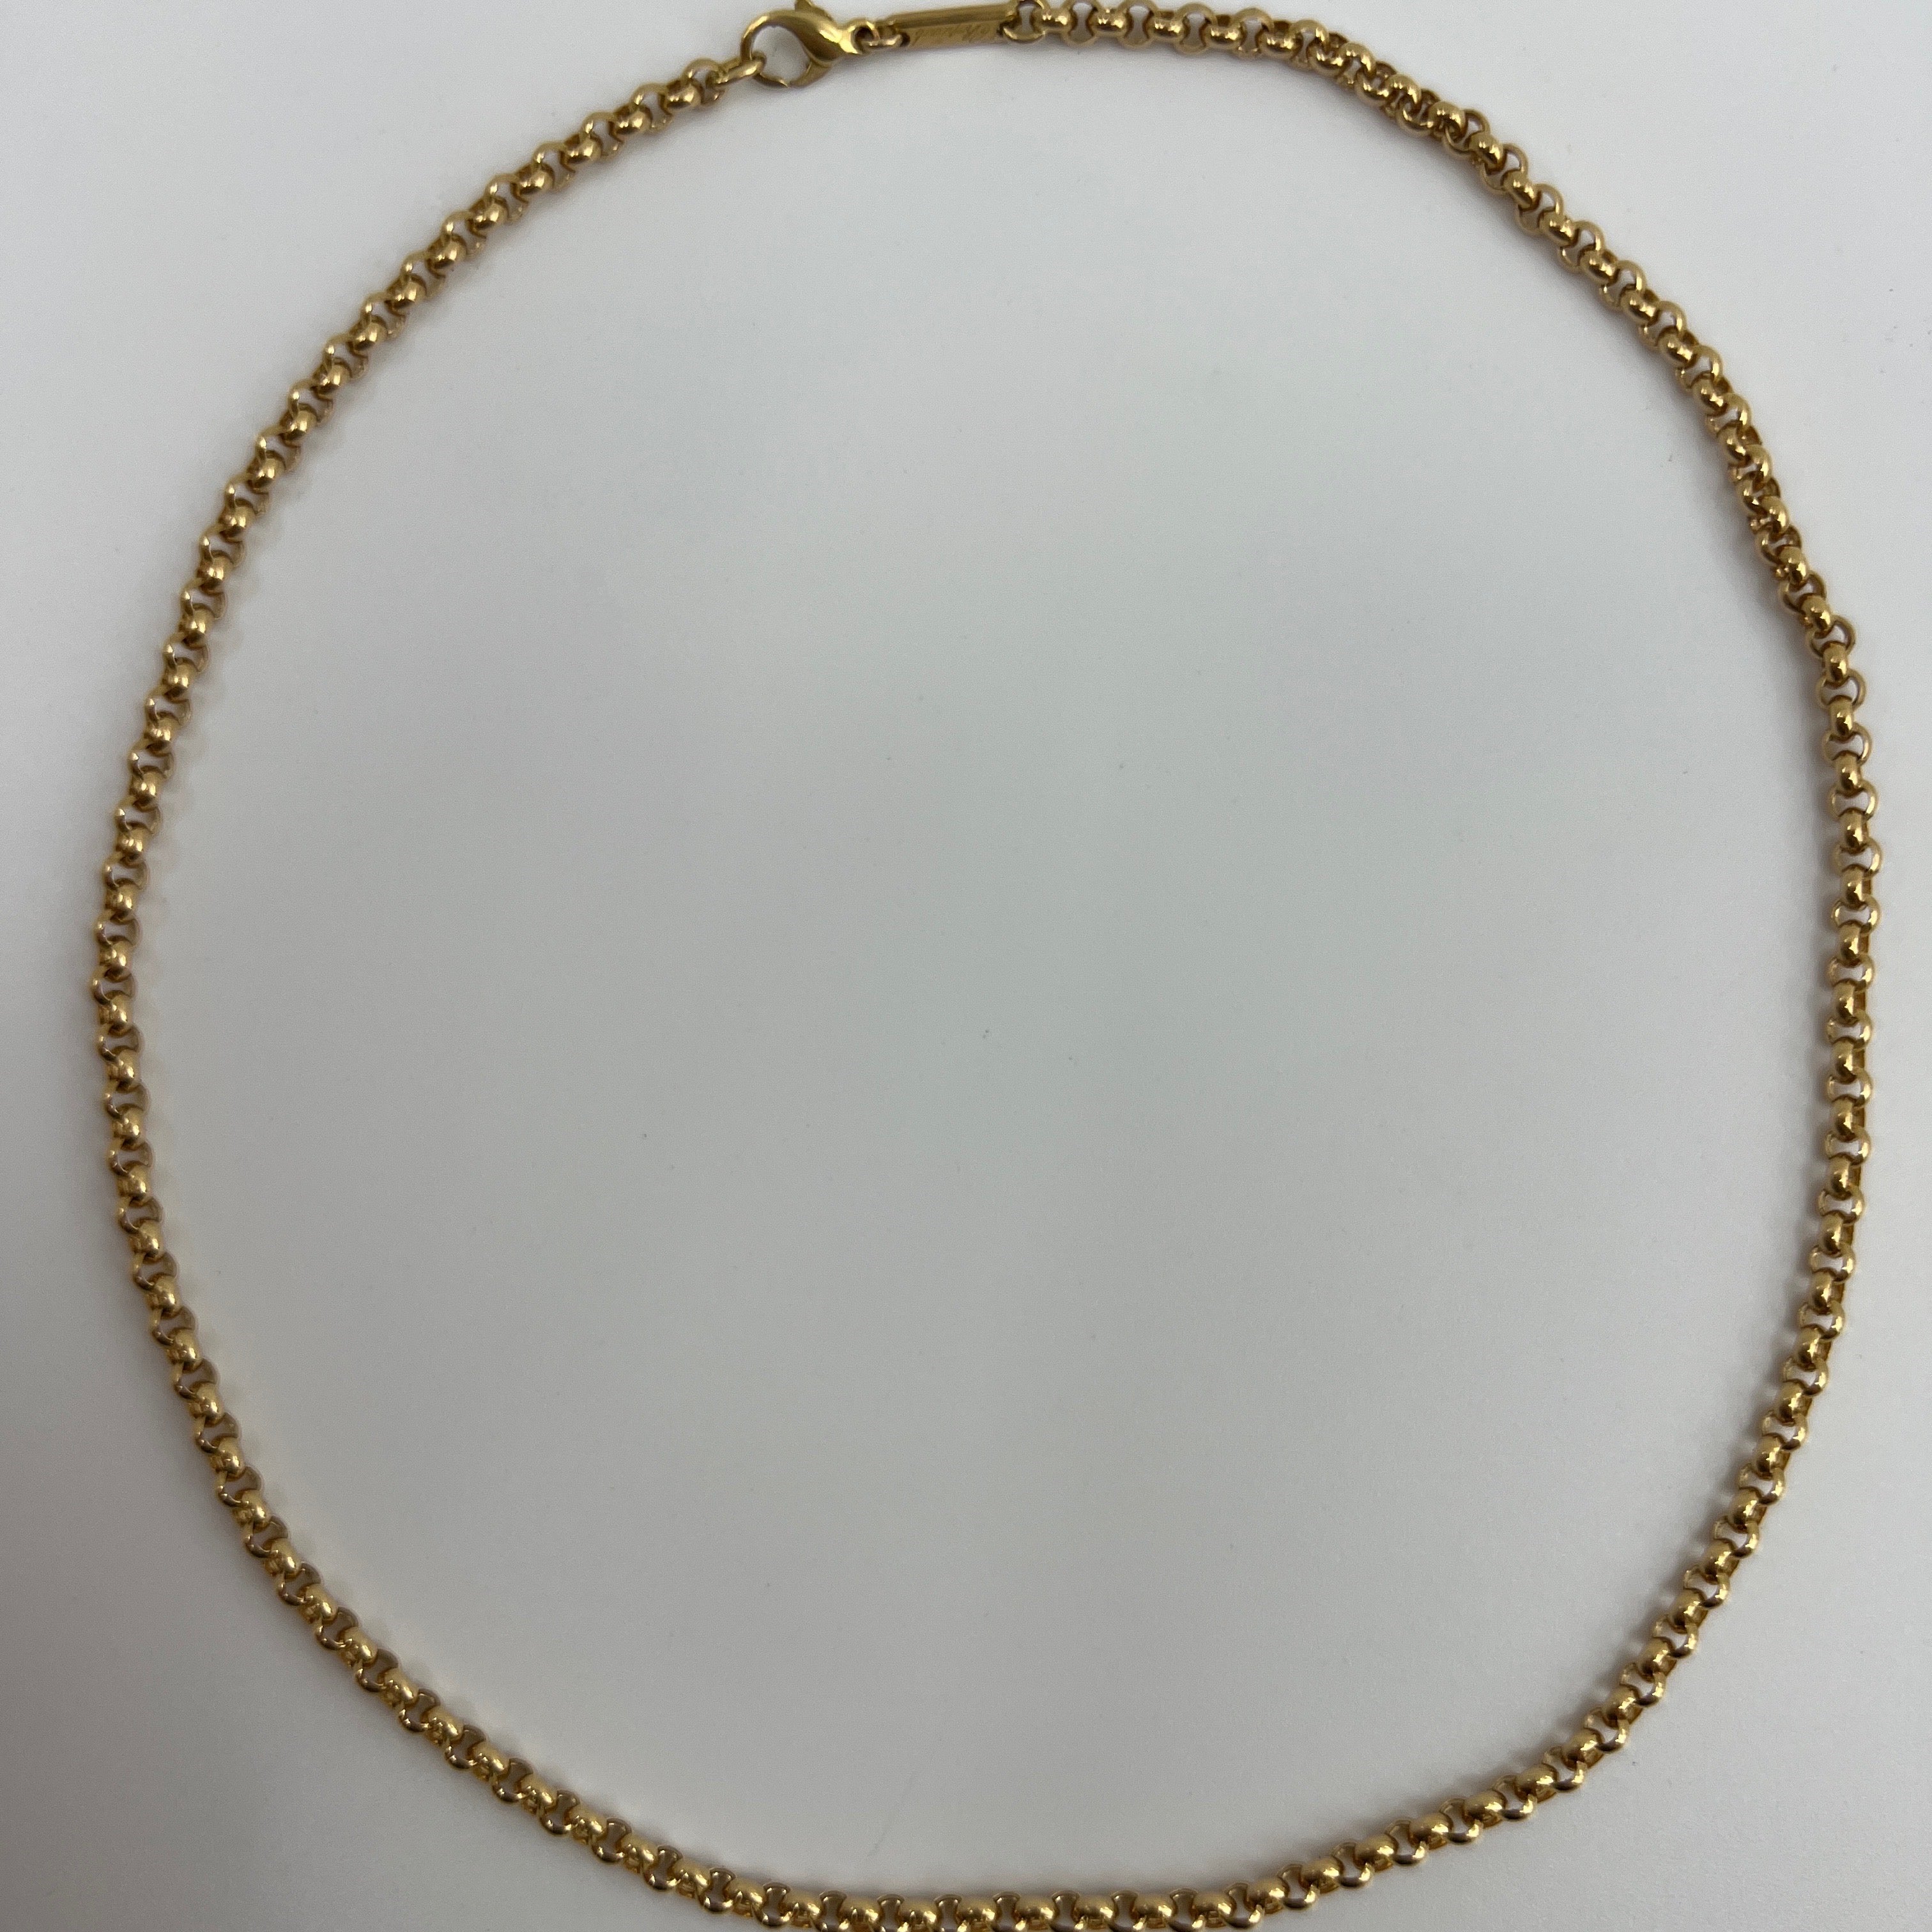 Chopard 18k Yellow Gold Belcher Pendant Necklace Chain.

Beautiful 16 inch/40cm belcher chain by chopard. 
Stunning stand-alone chain or would look great with a larger pendant.

The piece is signed Chopard, 750 (18k). with serial number. 

Chain